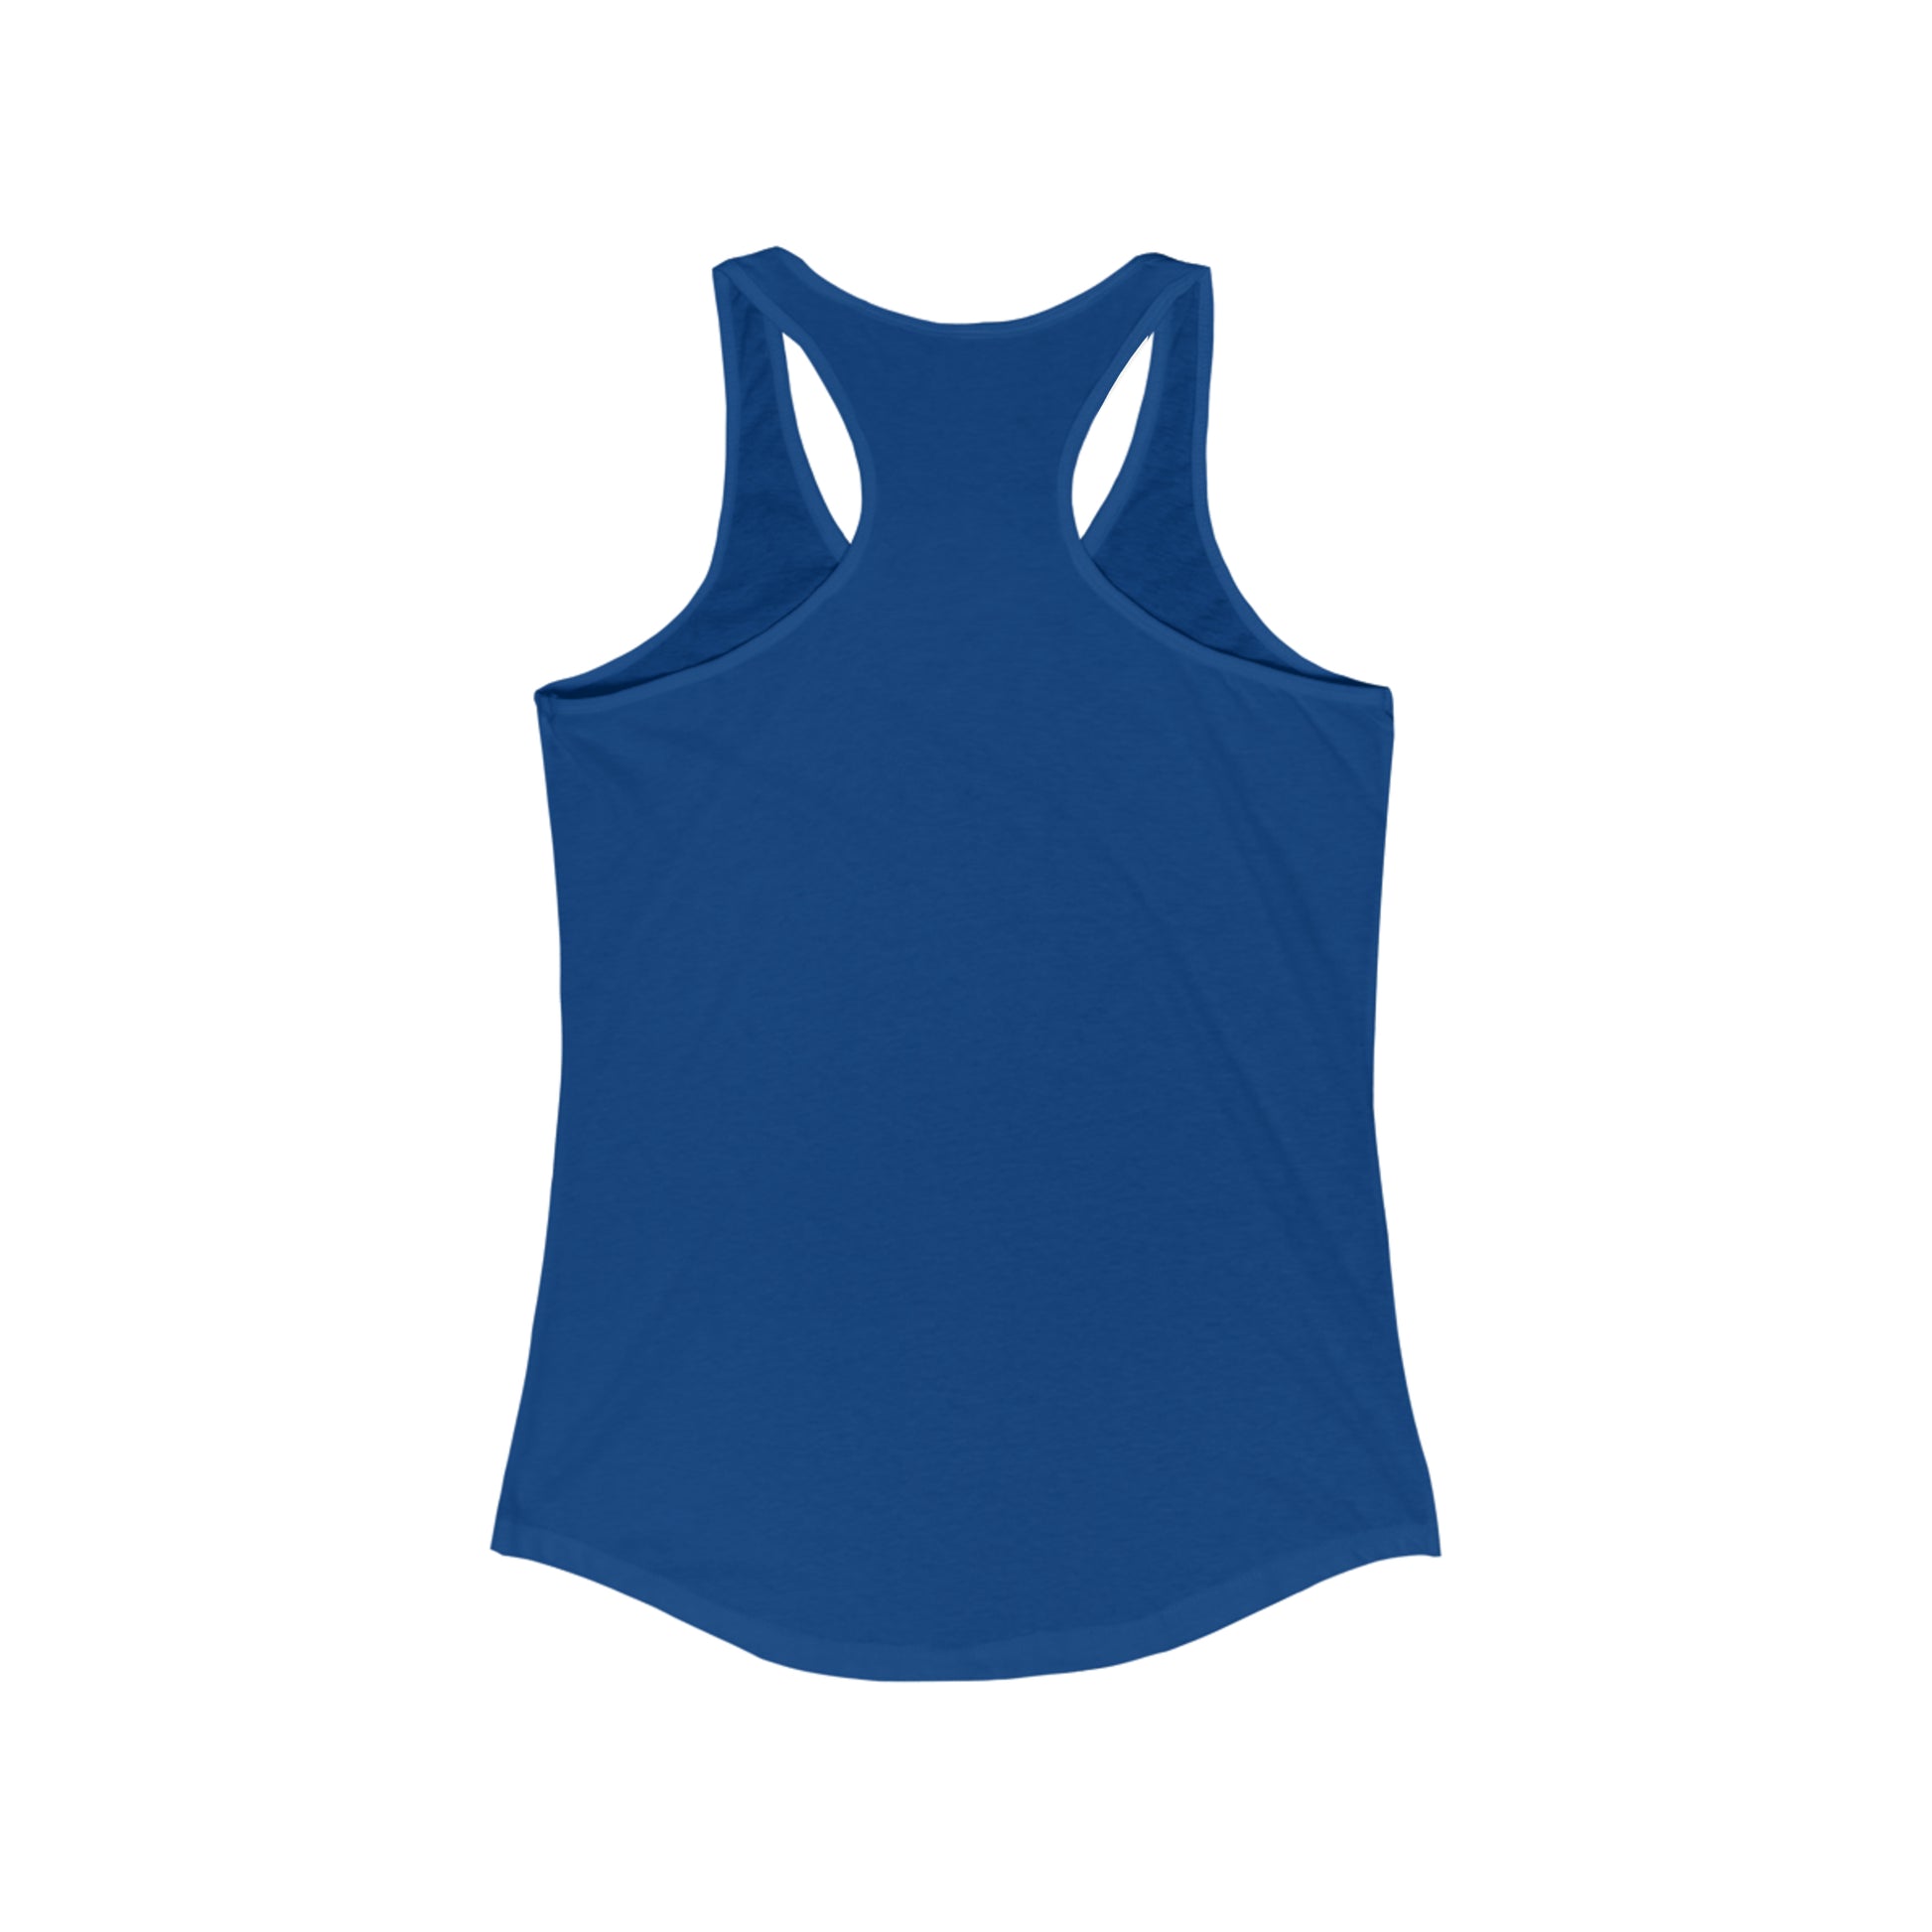 A plain blue Printify women's logo racerback tank top isolated on a white background, photographed in Cabbagetown, Toronto.